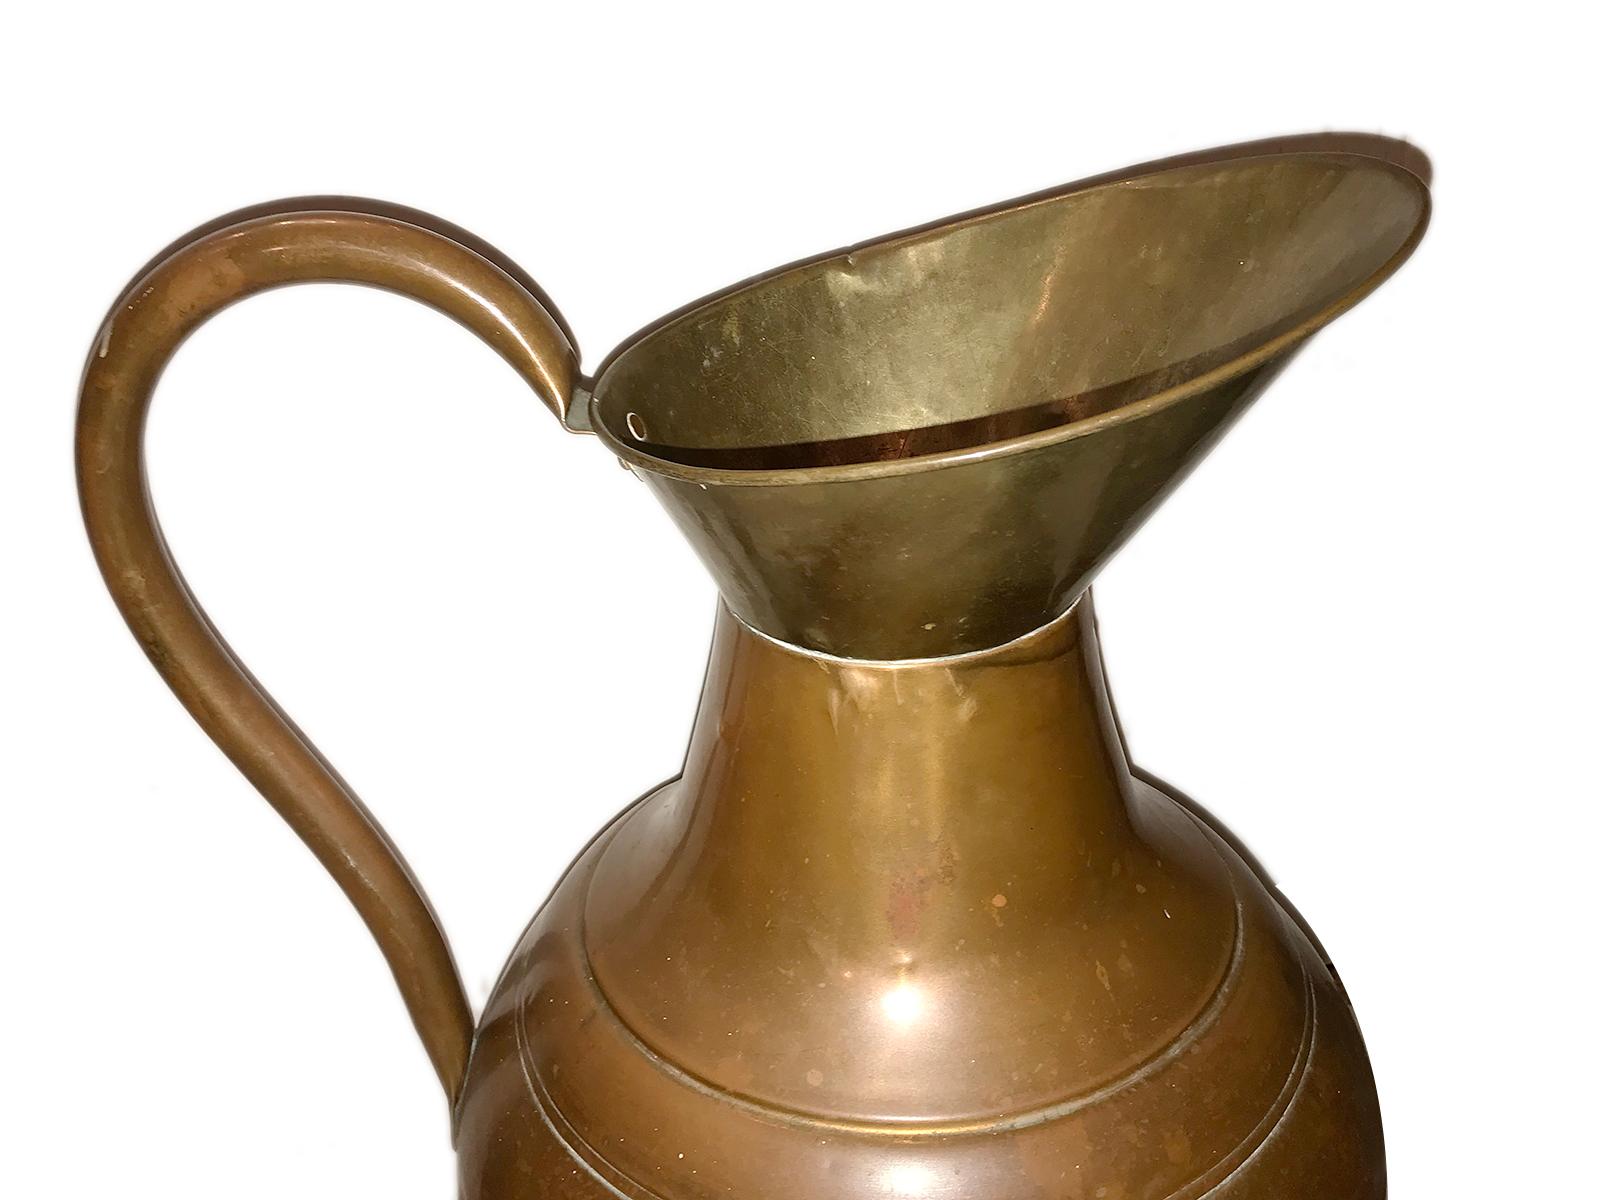 An English circa 1900 hammered copper and brass jug with original patina.

Measurements:
Height 19.5